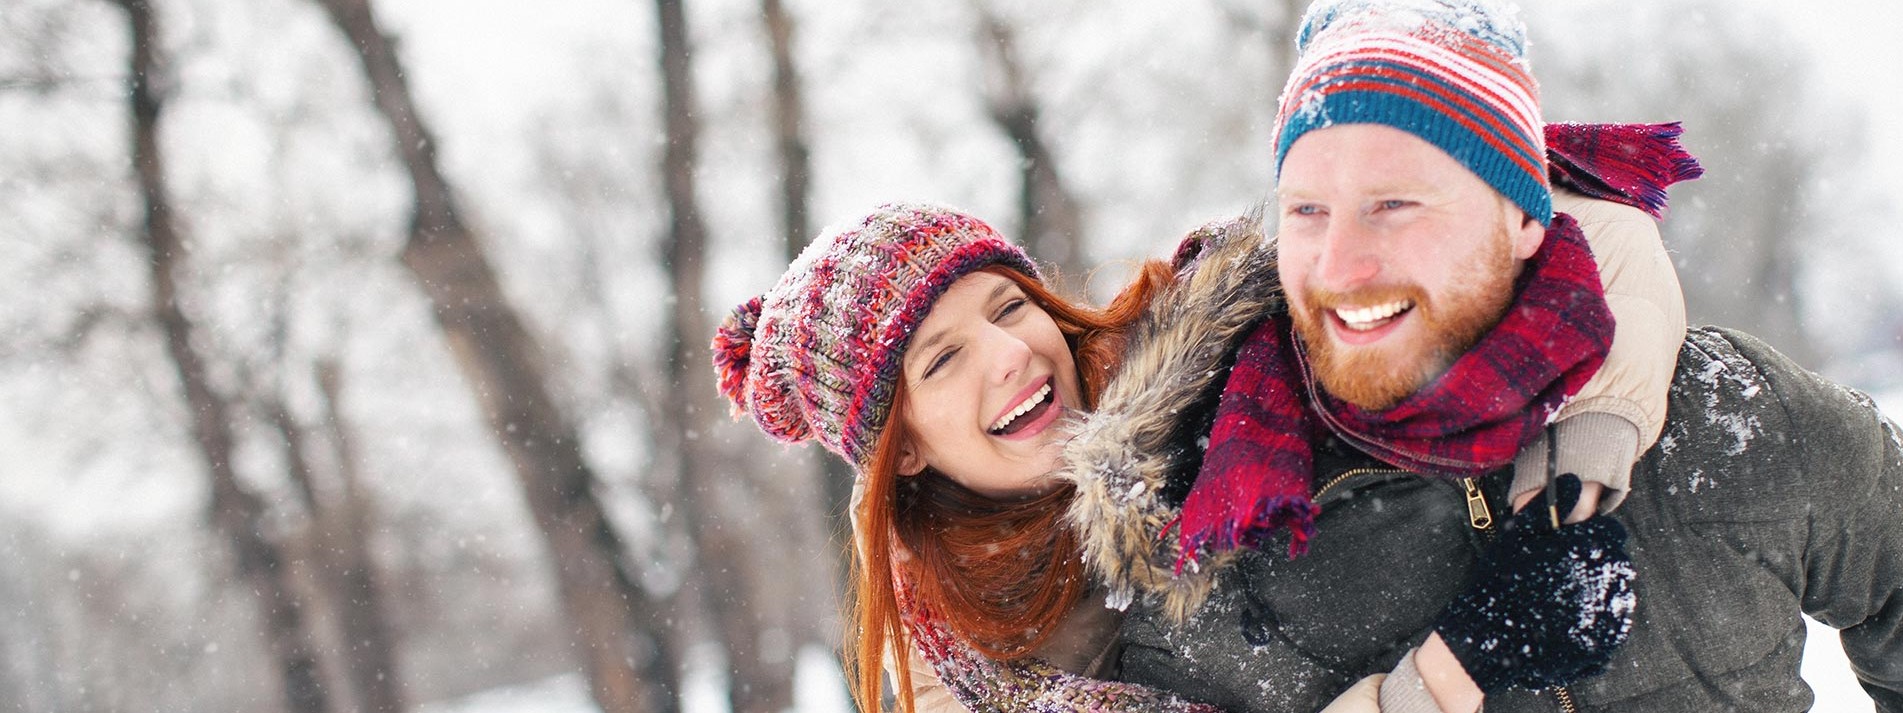 Young Couple Having Fun In The Snow